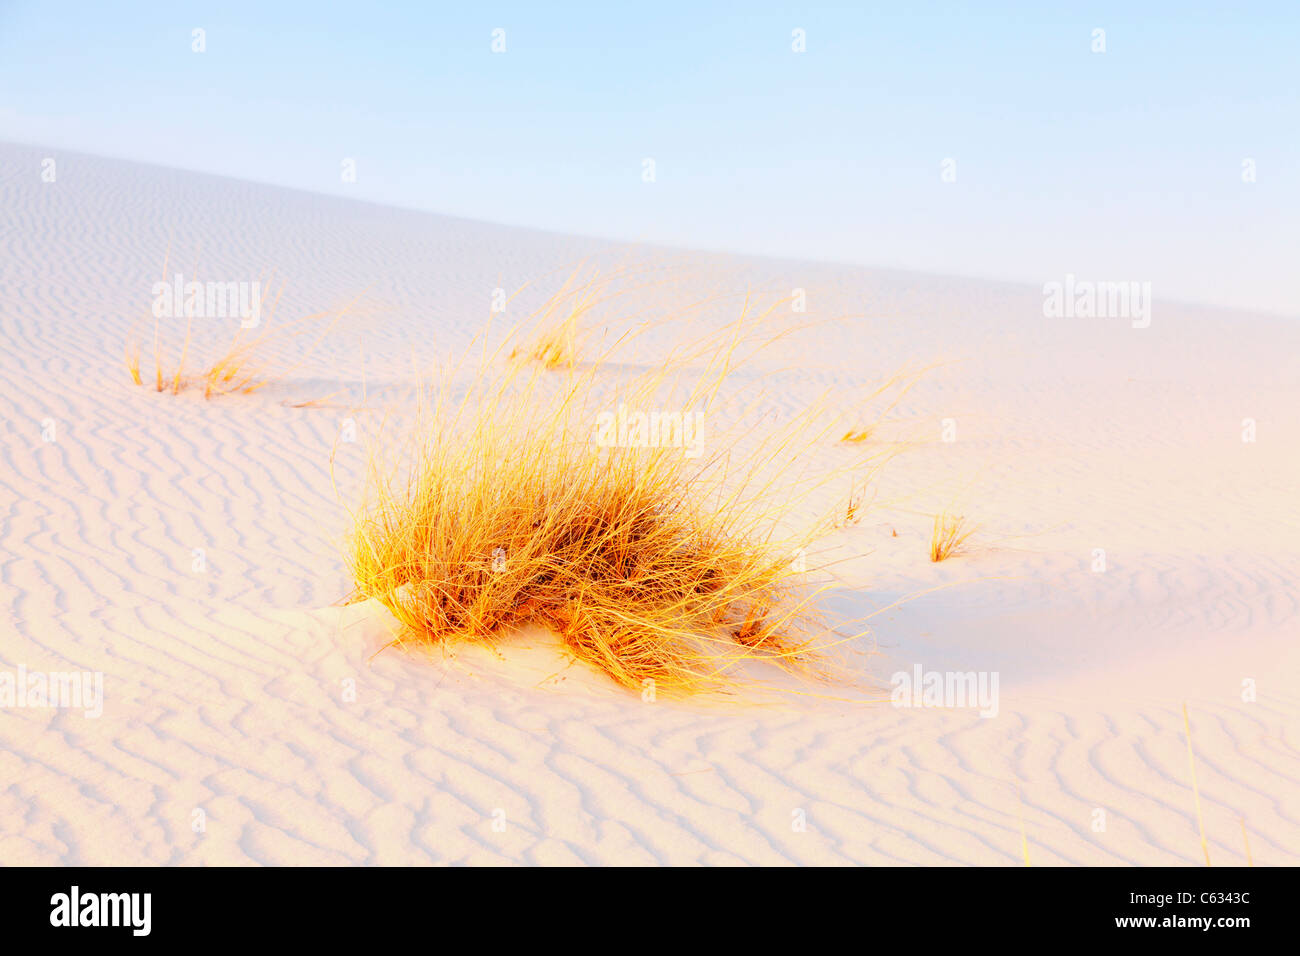 Gypsum dunes and grasses at White Sands Stock Photo